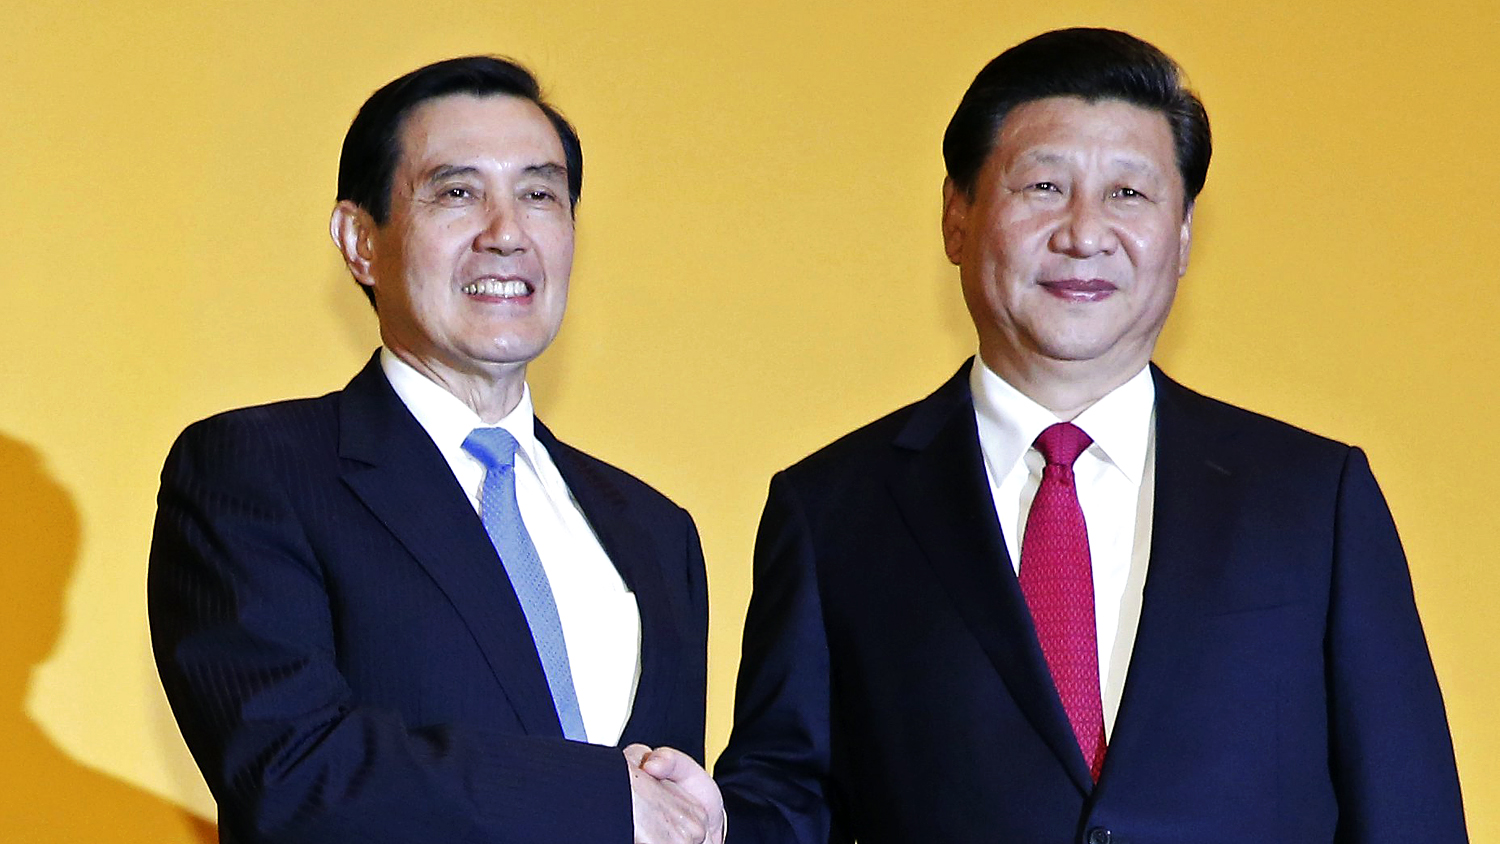 The meeting between President Ma Ying-jeou, left, and Xi Jinping earlier this month was the first between leaders from Taiwan and mainland China in over 60 years. Photo: Reuters